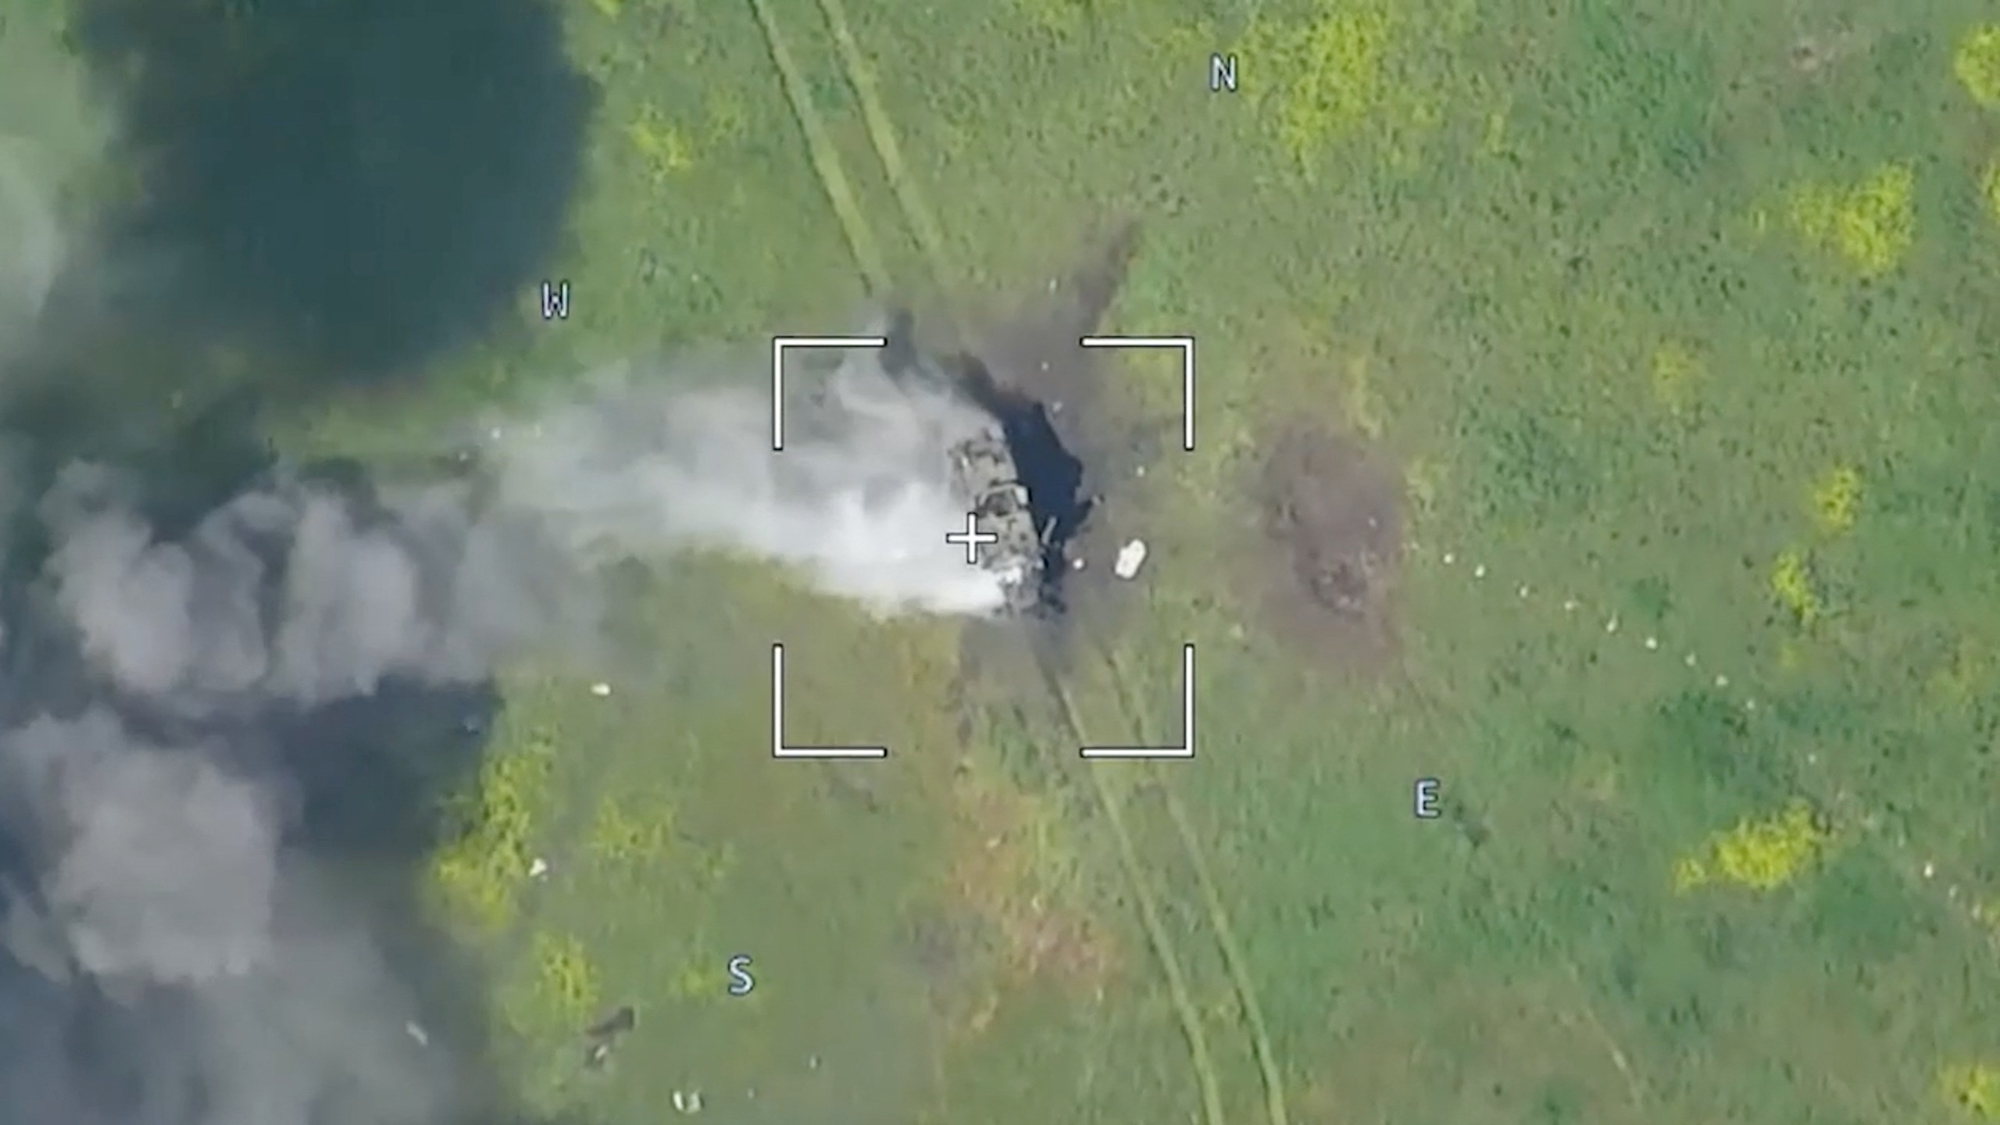 Drone footage released by Moscow on June 5 shows a burning armored vehicle in an unidentified location after the Russian defense ministry said its forces had thwarted a major Ukrainian offensive in the southern Ukrainian region of Donetsk.